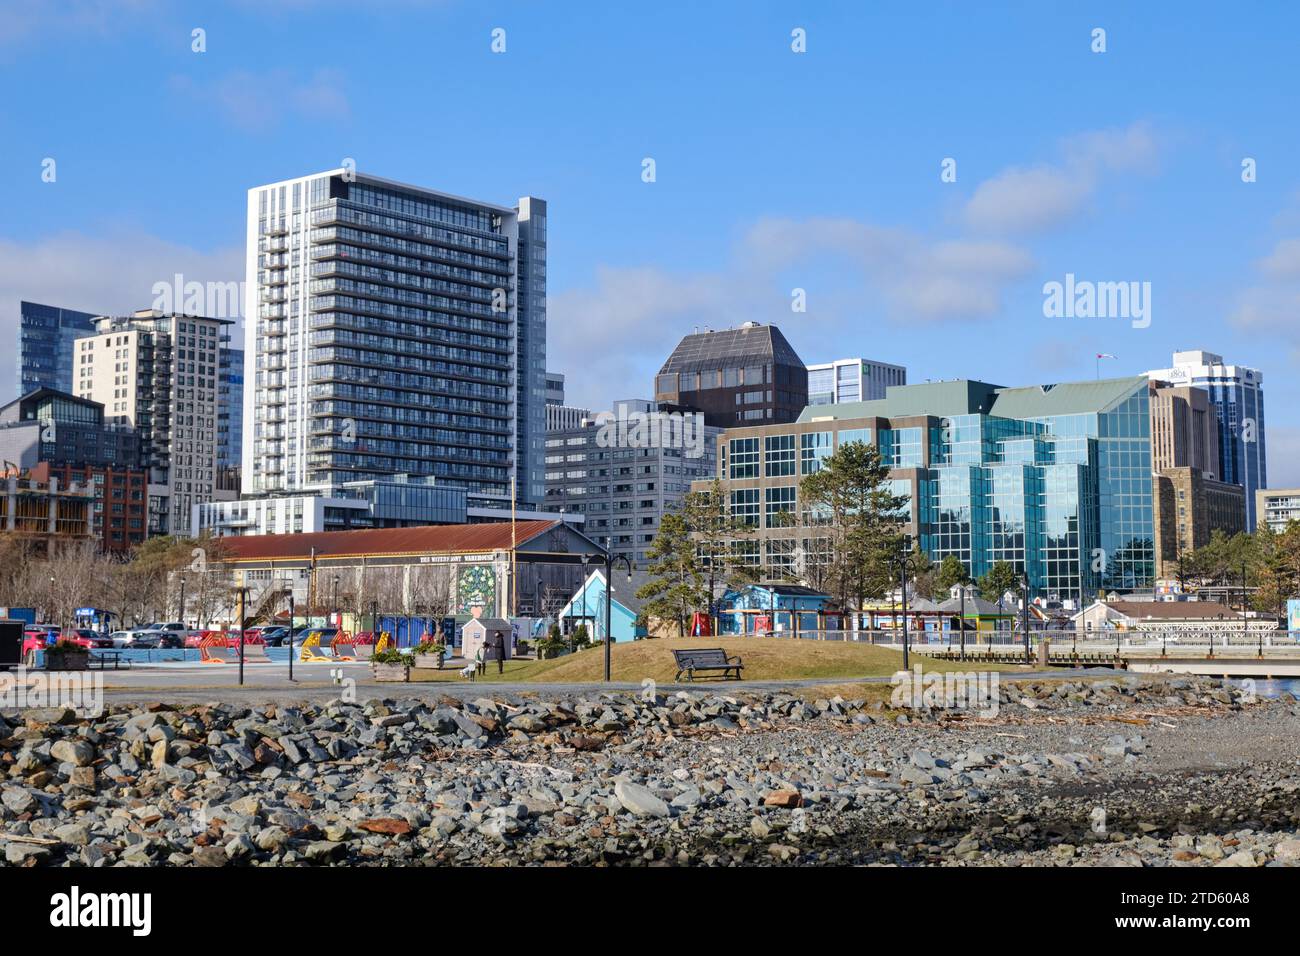 Halifax downtown buidlings seen from the waterfront boardwalk Stock Photo